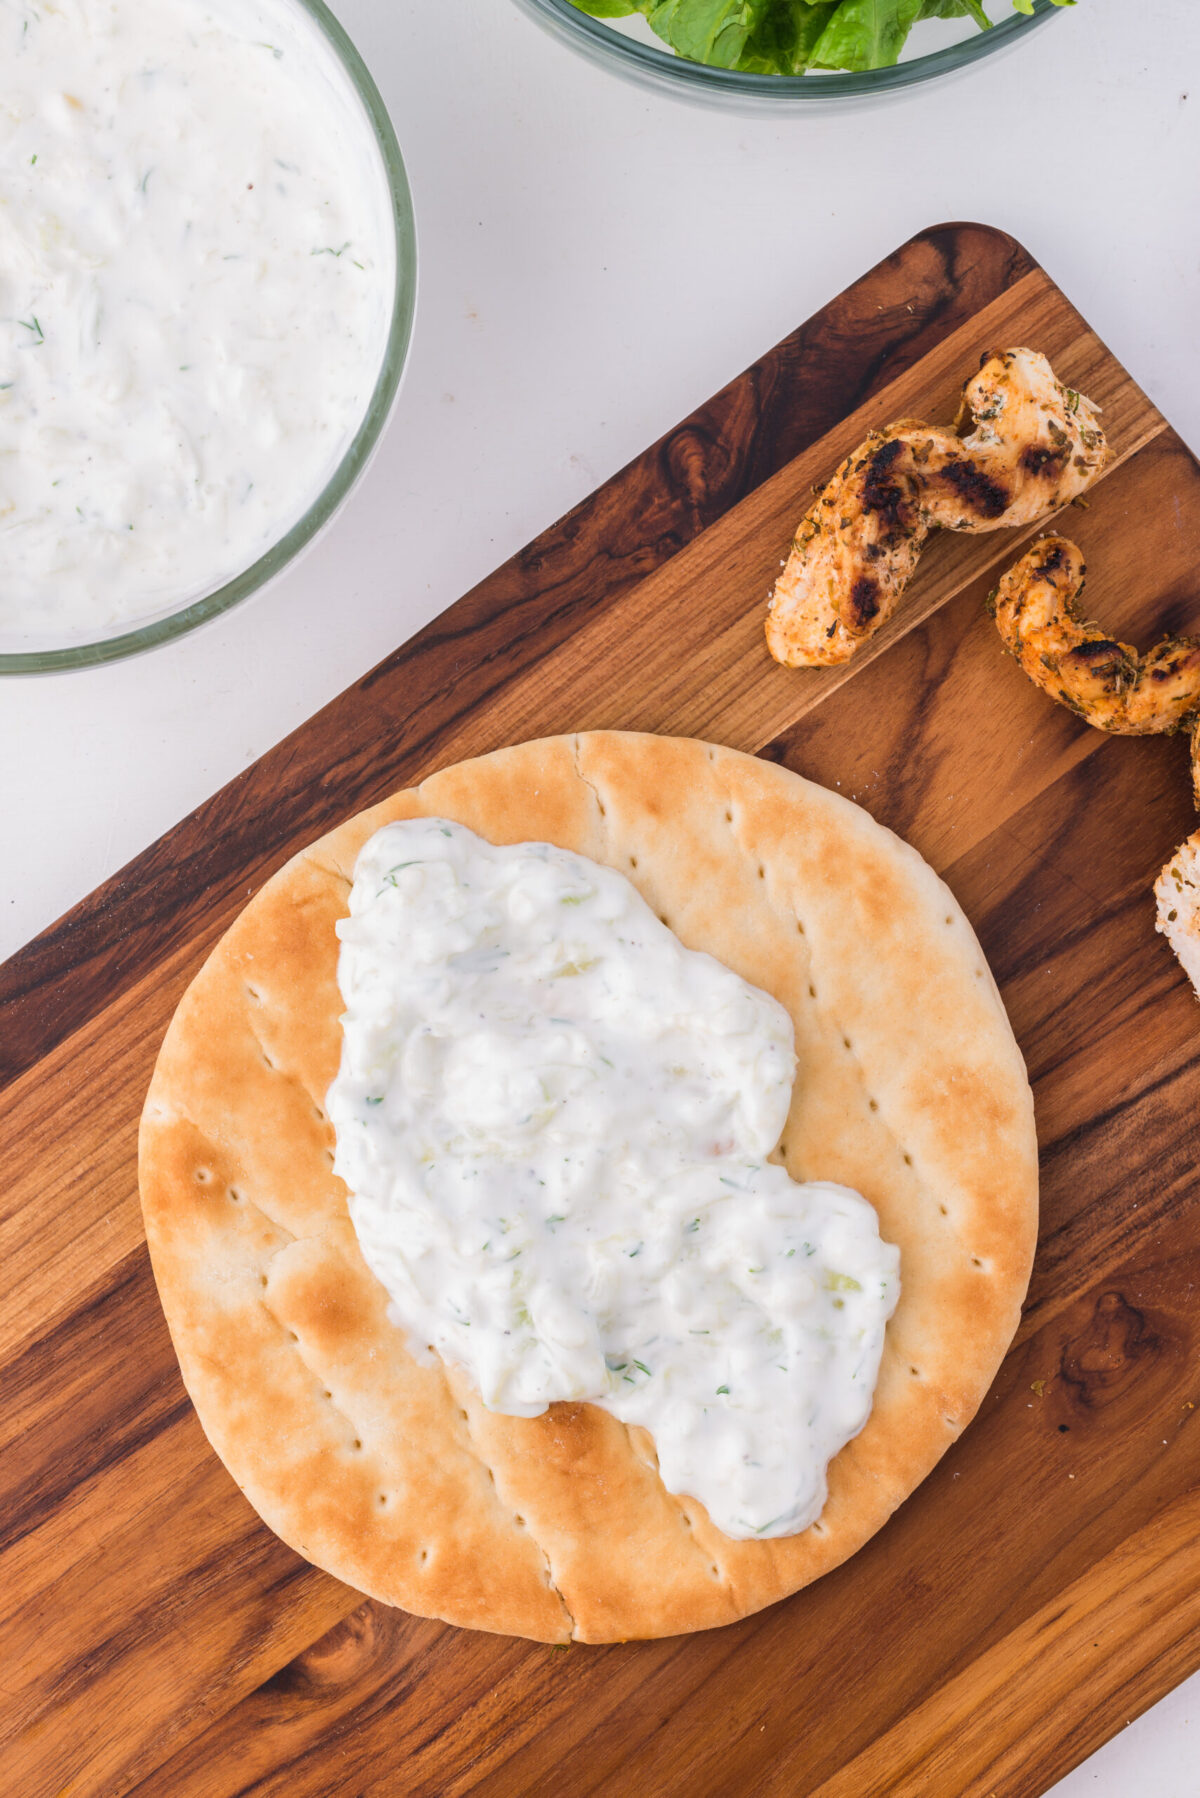 pita bread on a woo cutting board with tzatziki spread on it, grilled chicken pieces top right, tzatziki in a glass bowl top left